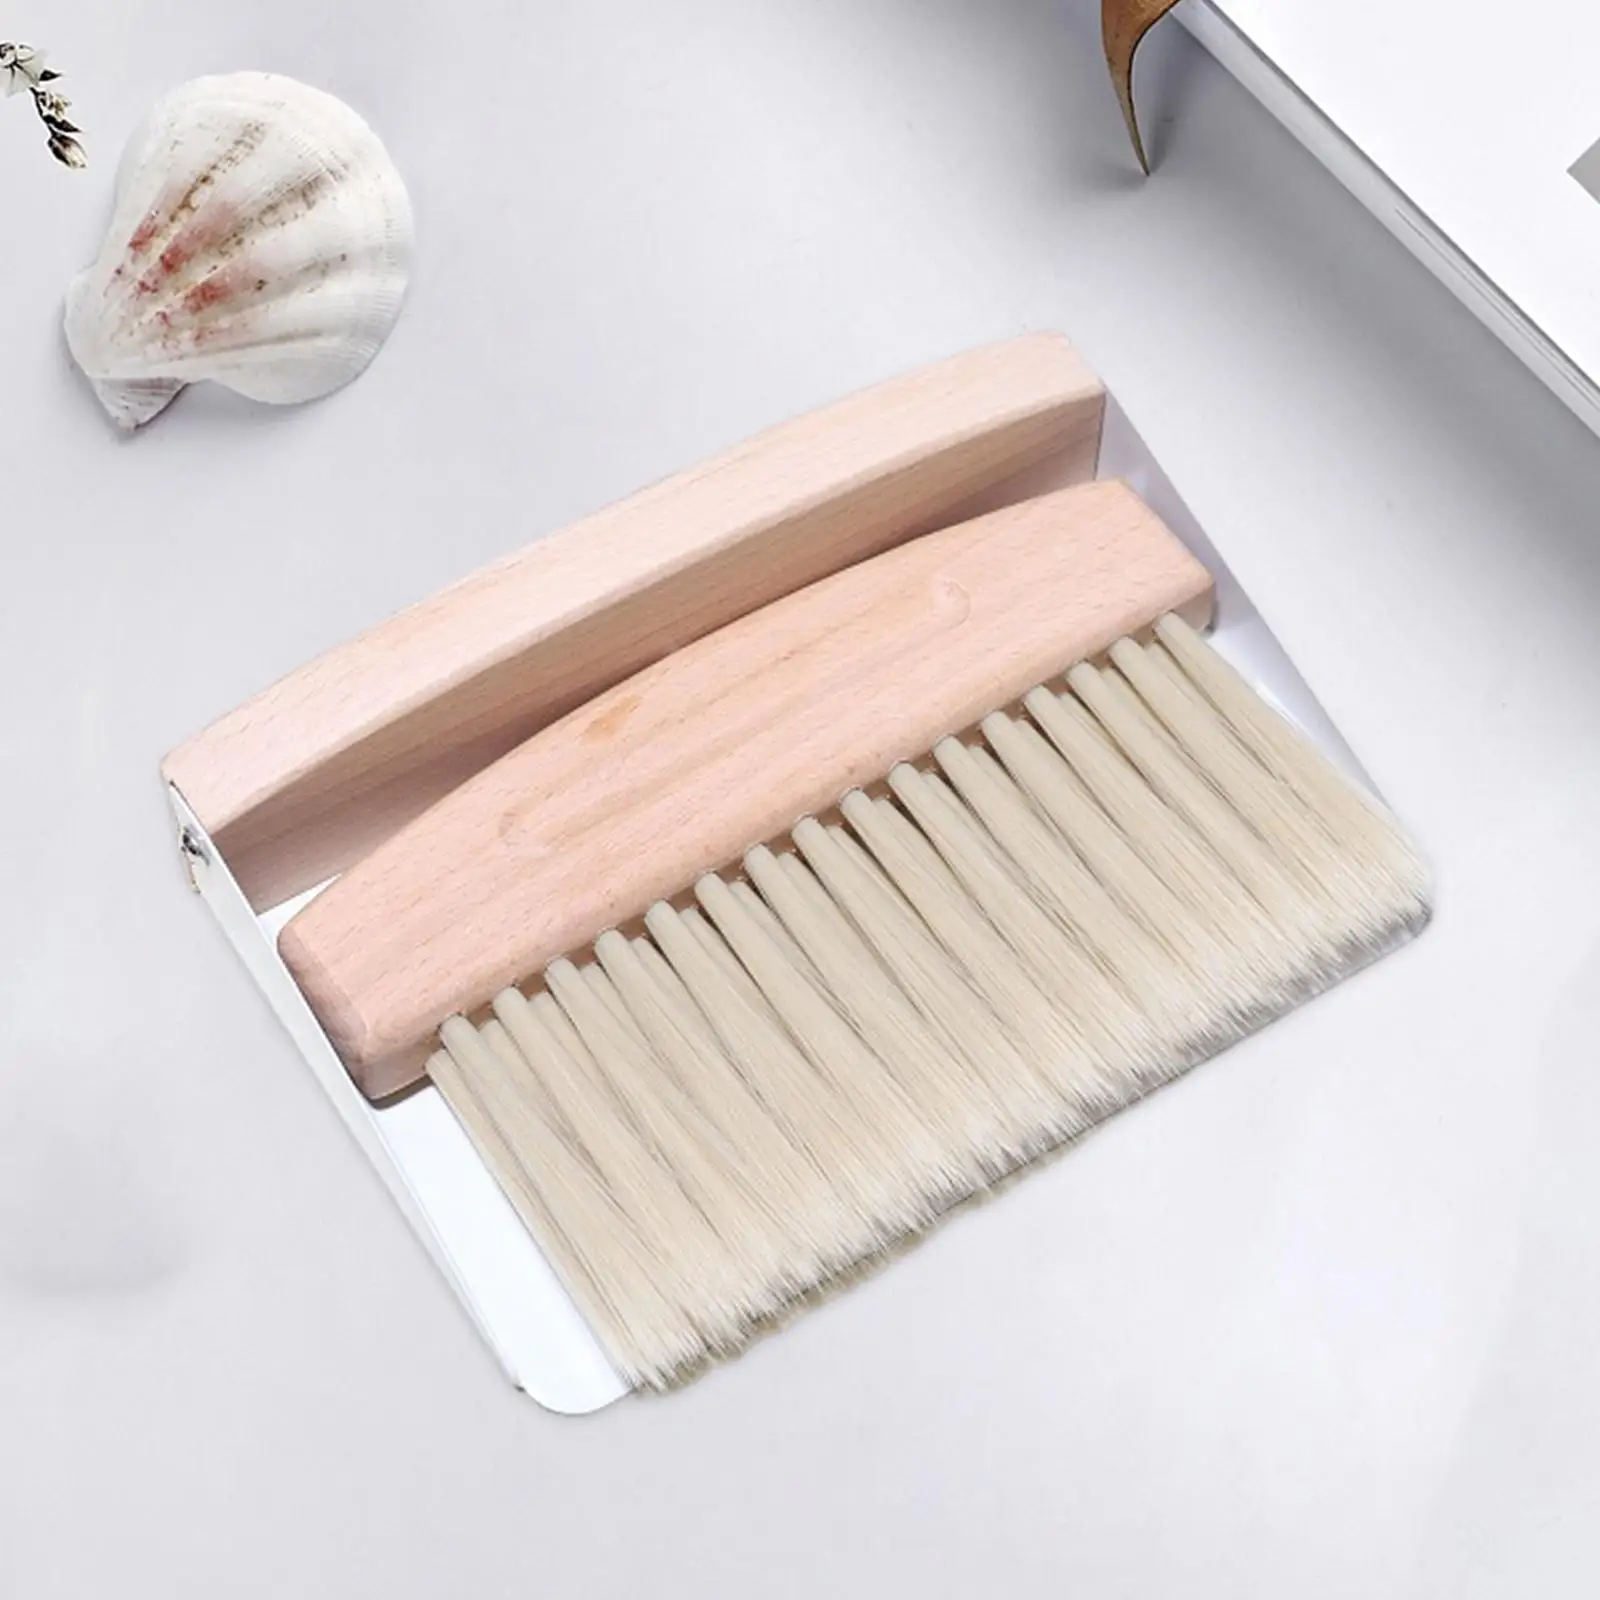 Mini Broom Dustpan Set Multipurpose Small Housekeeping Cleaning for Table Dust Window Sills Small Pet Feces Fruit Peels Office